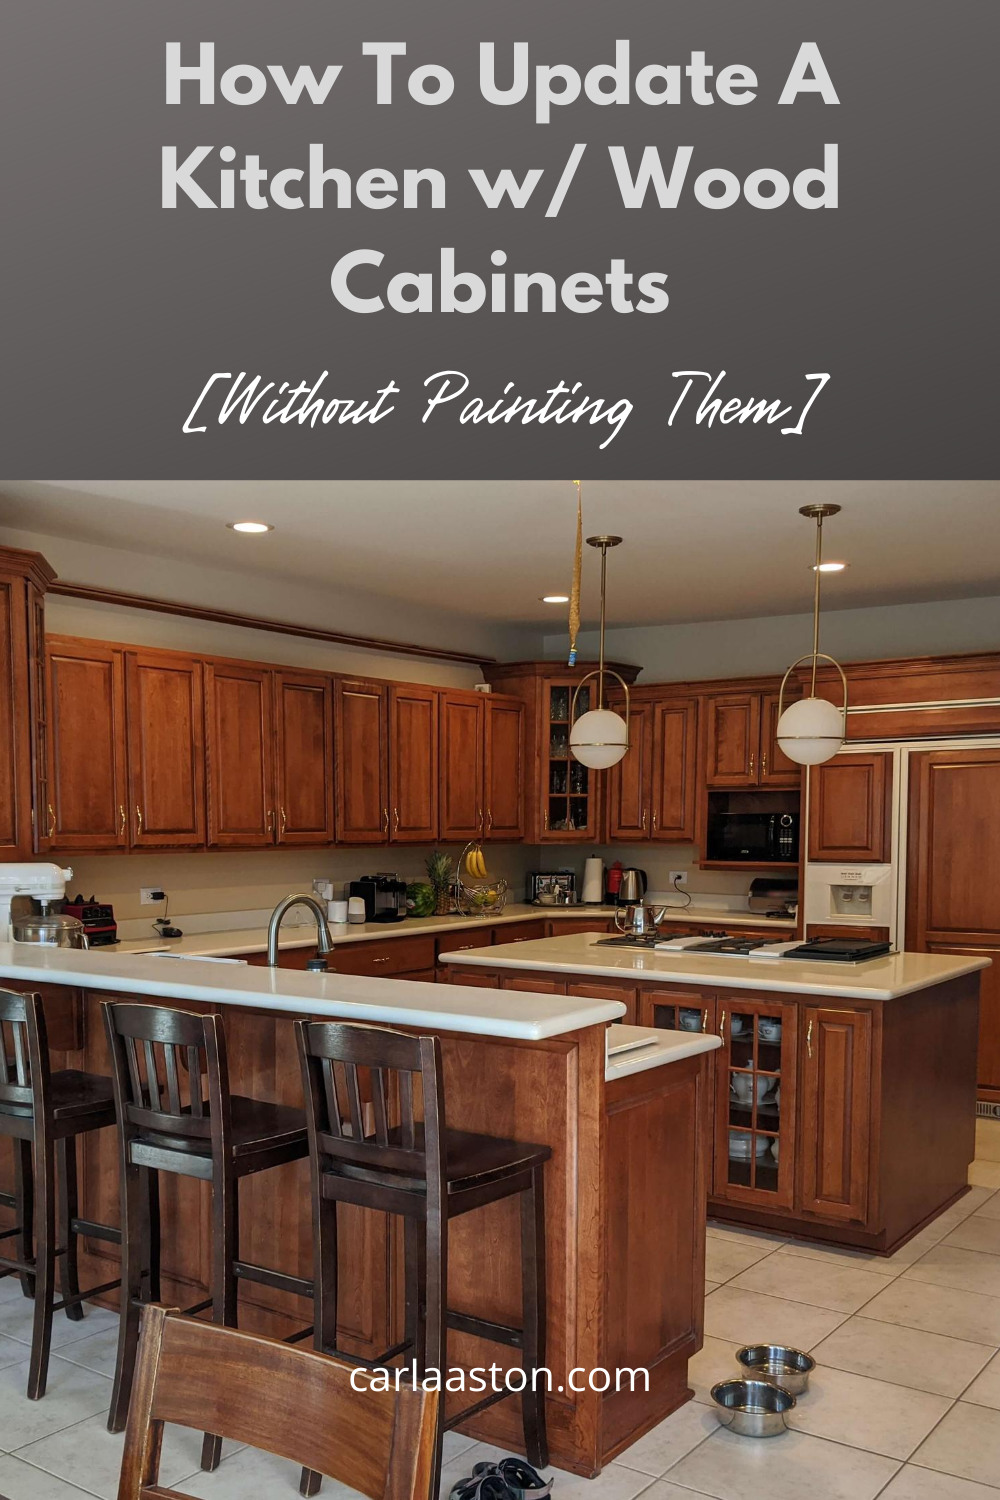 Wood Cabinets Without Painting, Redo Kitchen Cabinets Without Painting